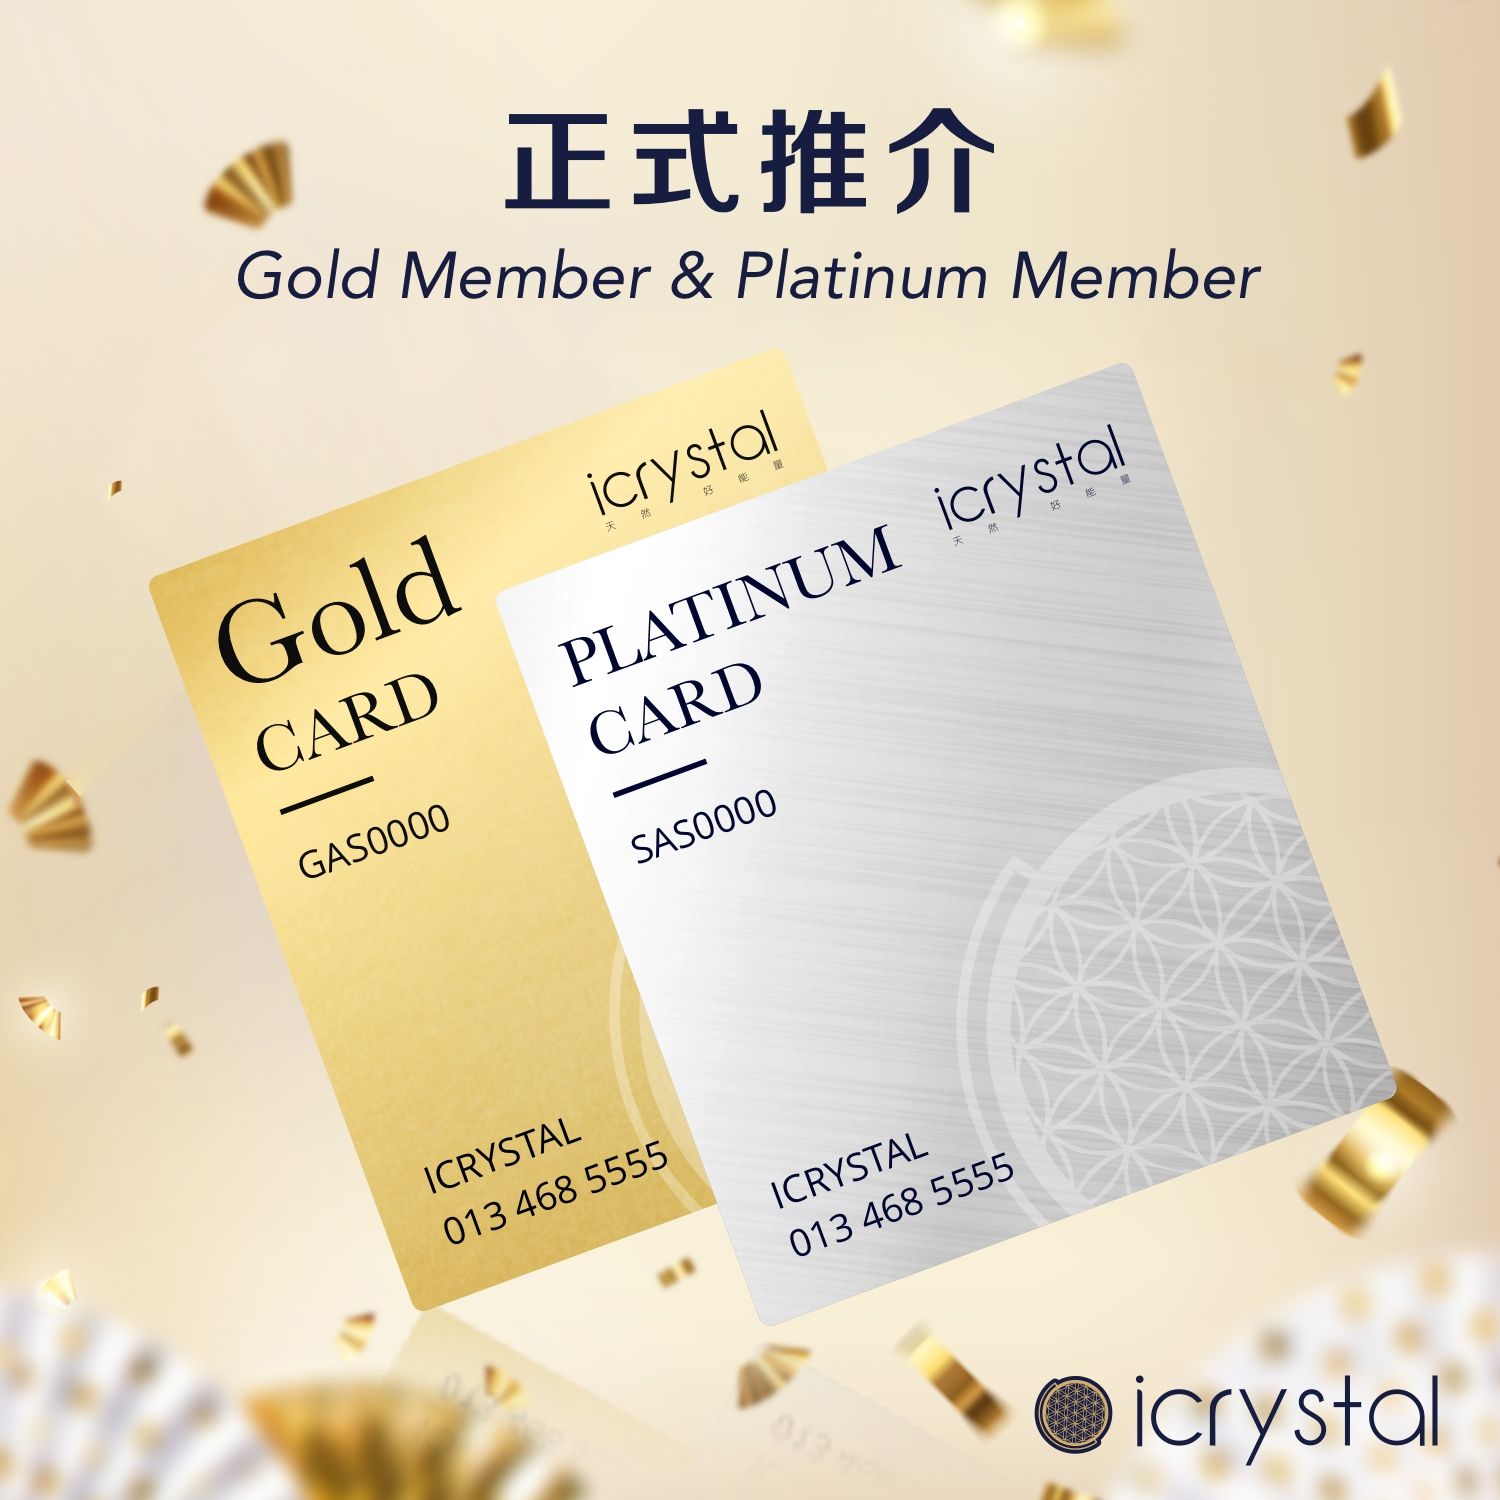 ICRYSTAL officially introduce Gold Member & Platinum Member